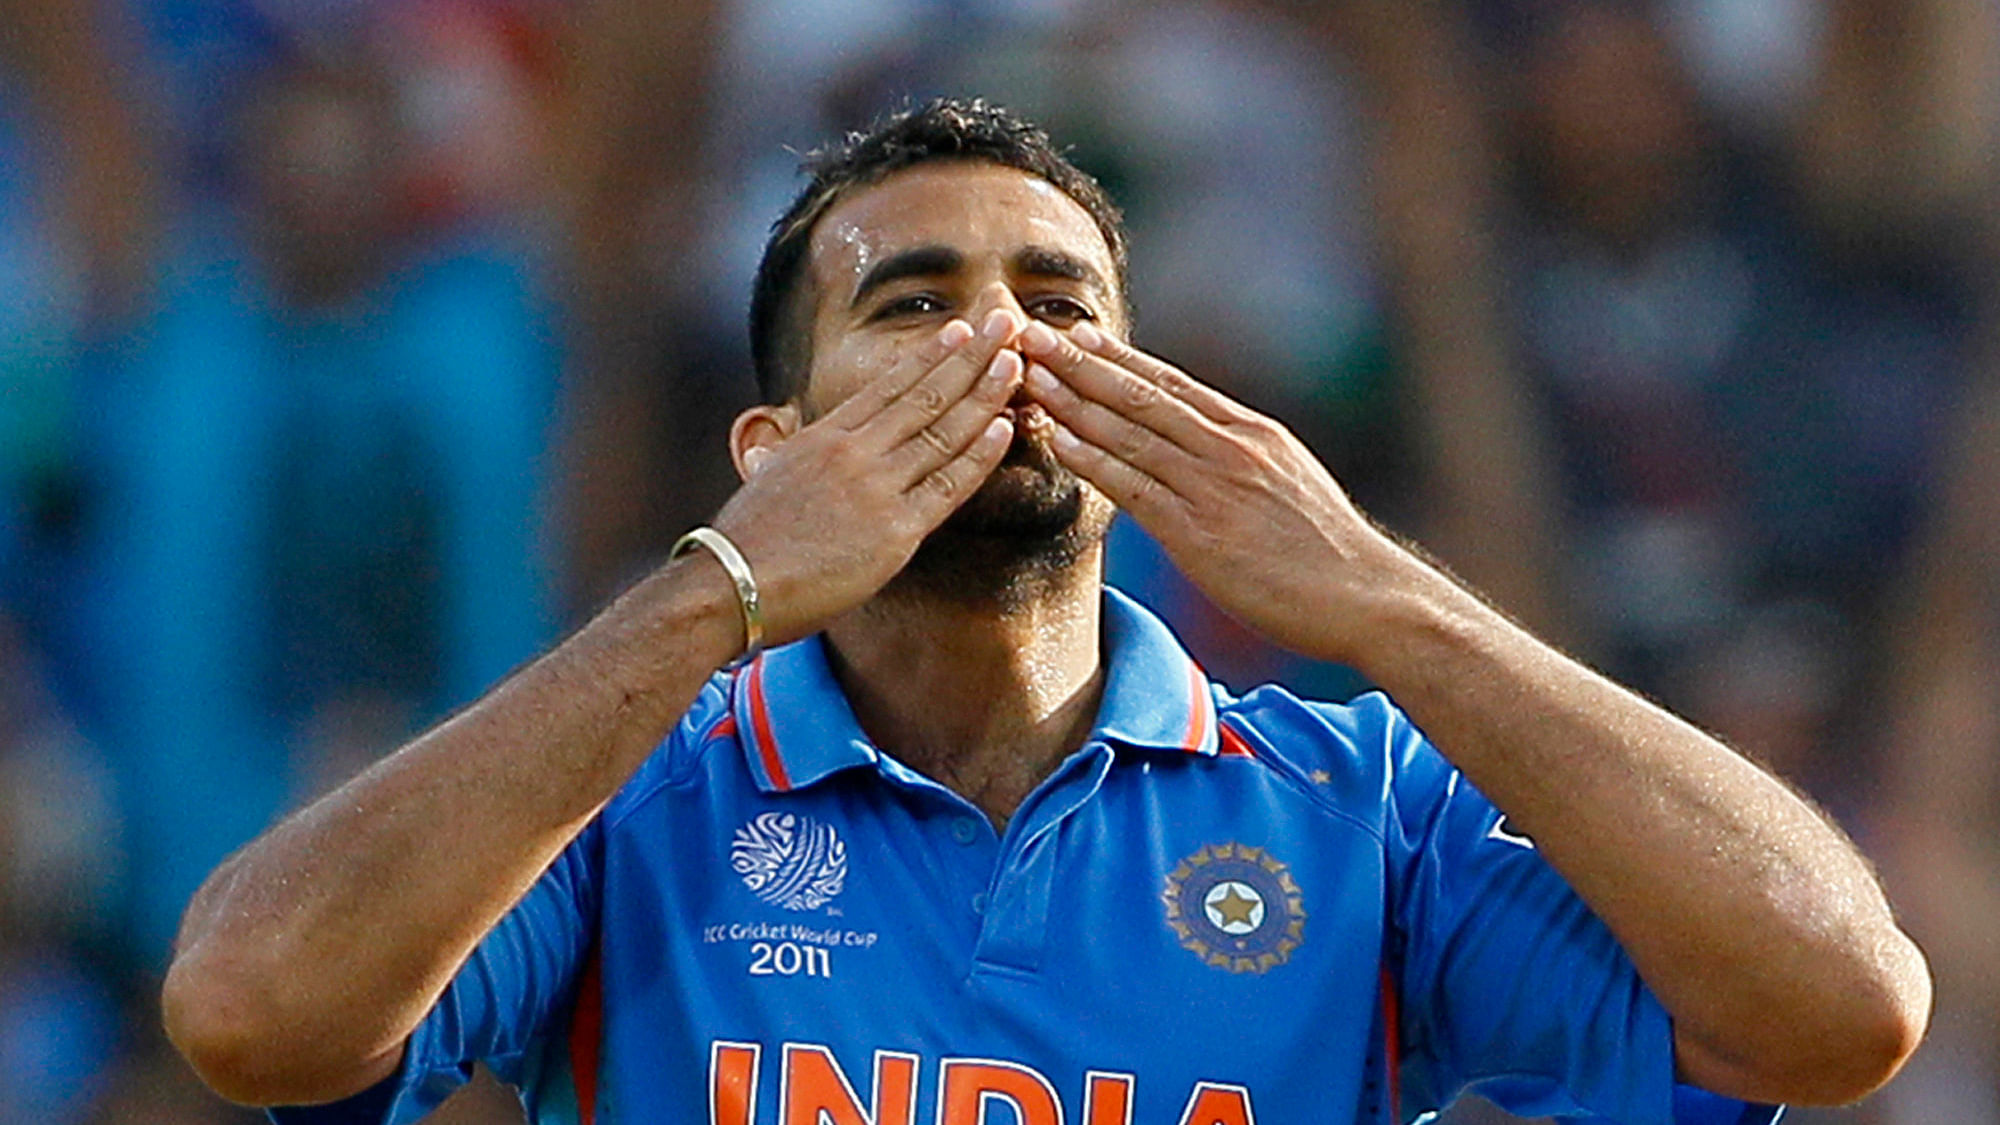 Zaheer Khan was the leading wicket-taker at the 2011 World Cup. (Photo: AP)